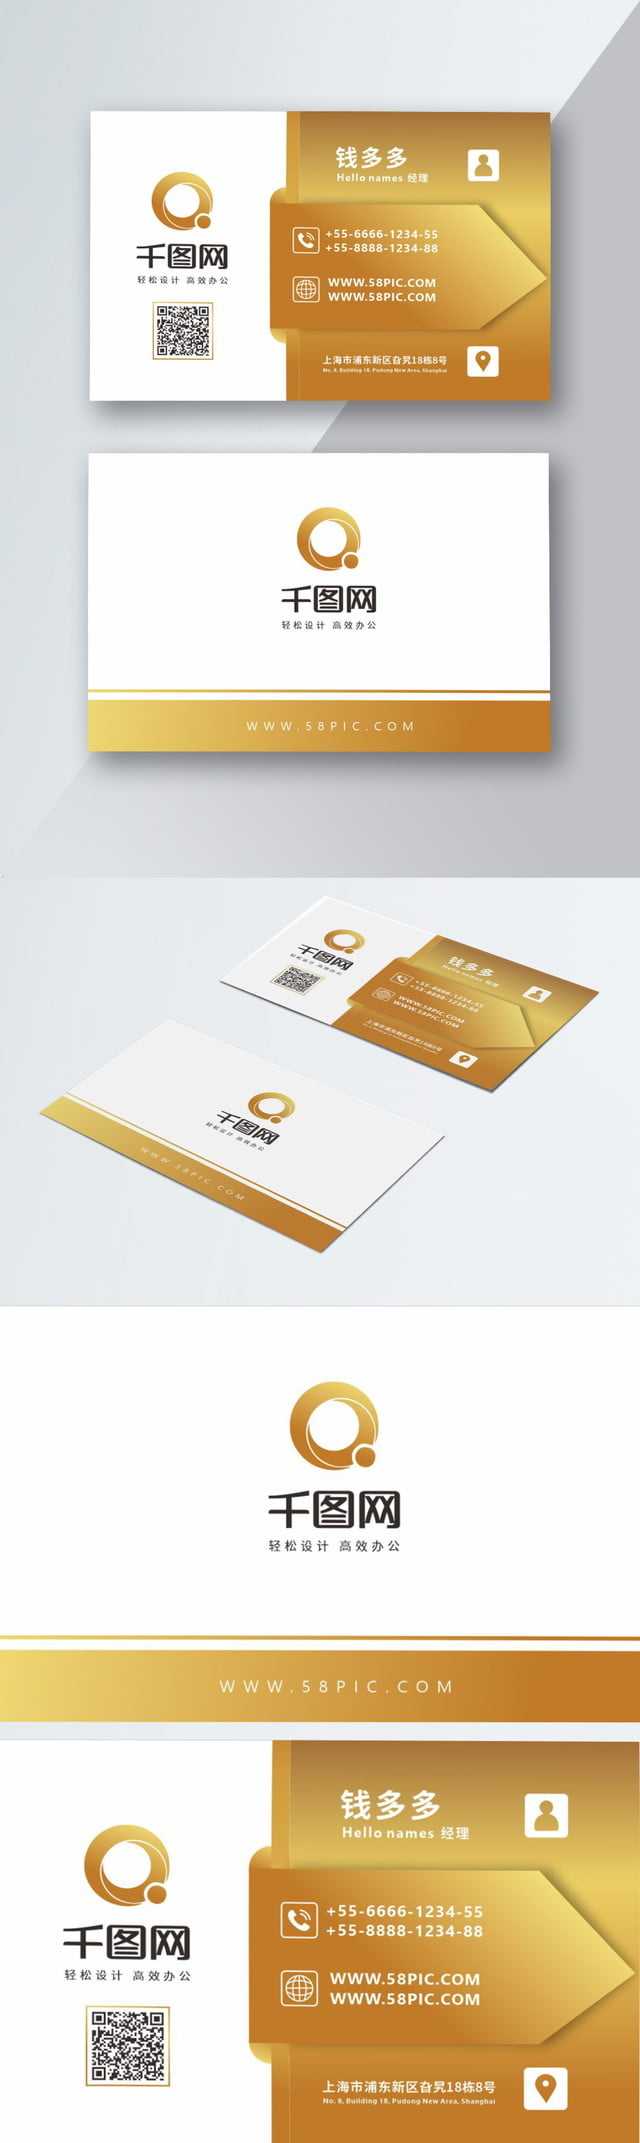 Hotel Business Card Vector Material Hotel Business Card Intended For Visiting Card Templates Download